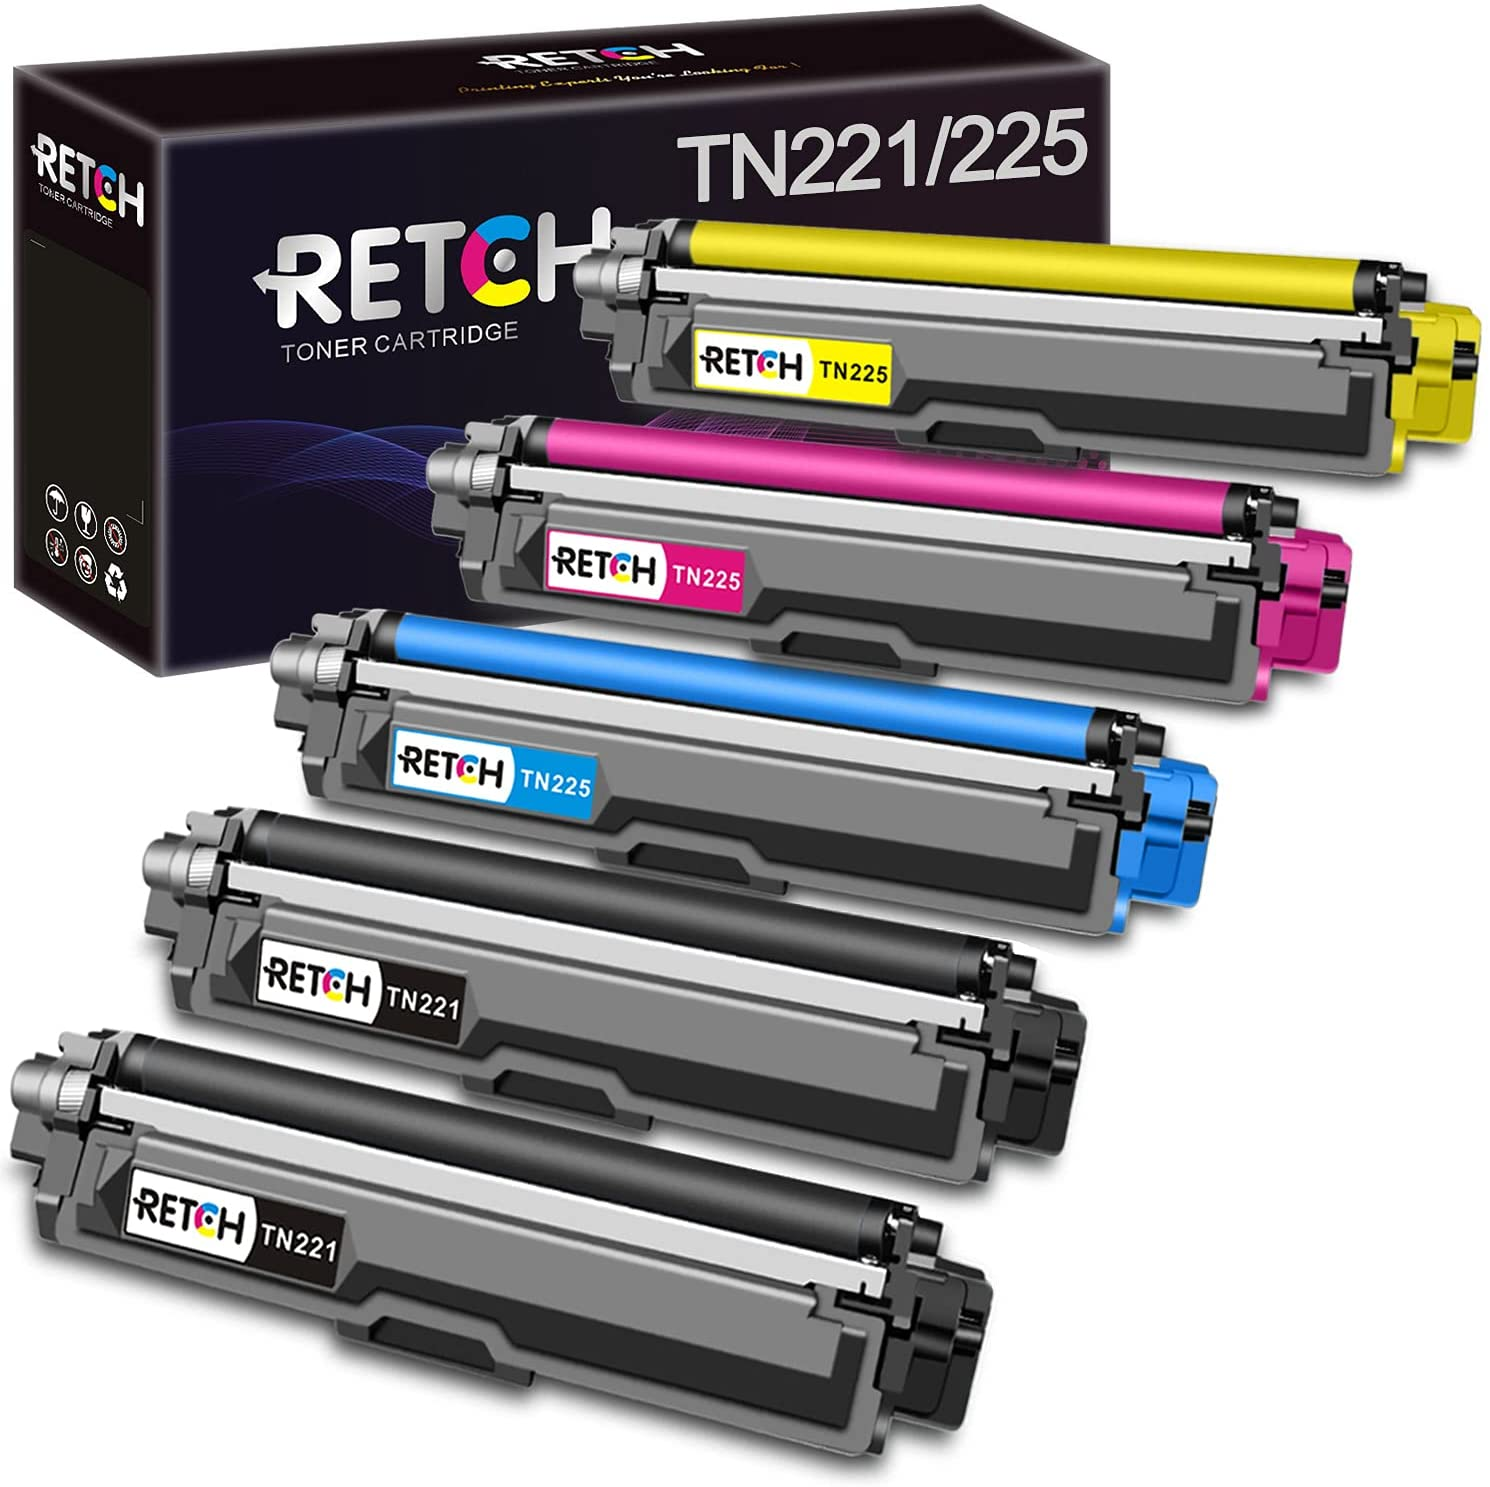 Amazon.com: Compatible Toner Cartridges Replacement for Brother TN221 TN225 for MFC-9130CW HL-3140CW HL-3170CDW HL-3180CDW MFC-9330CDW $19.99